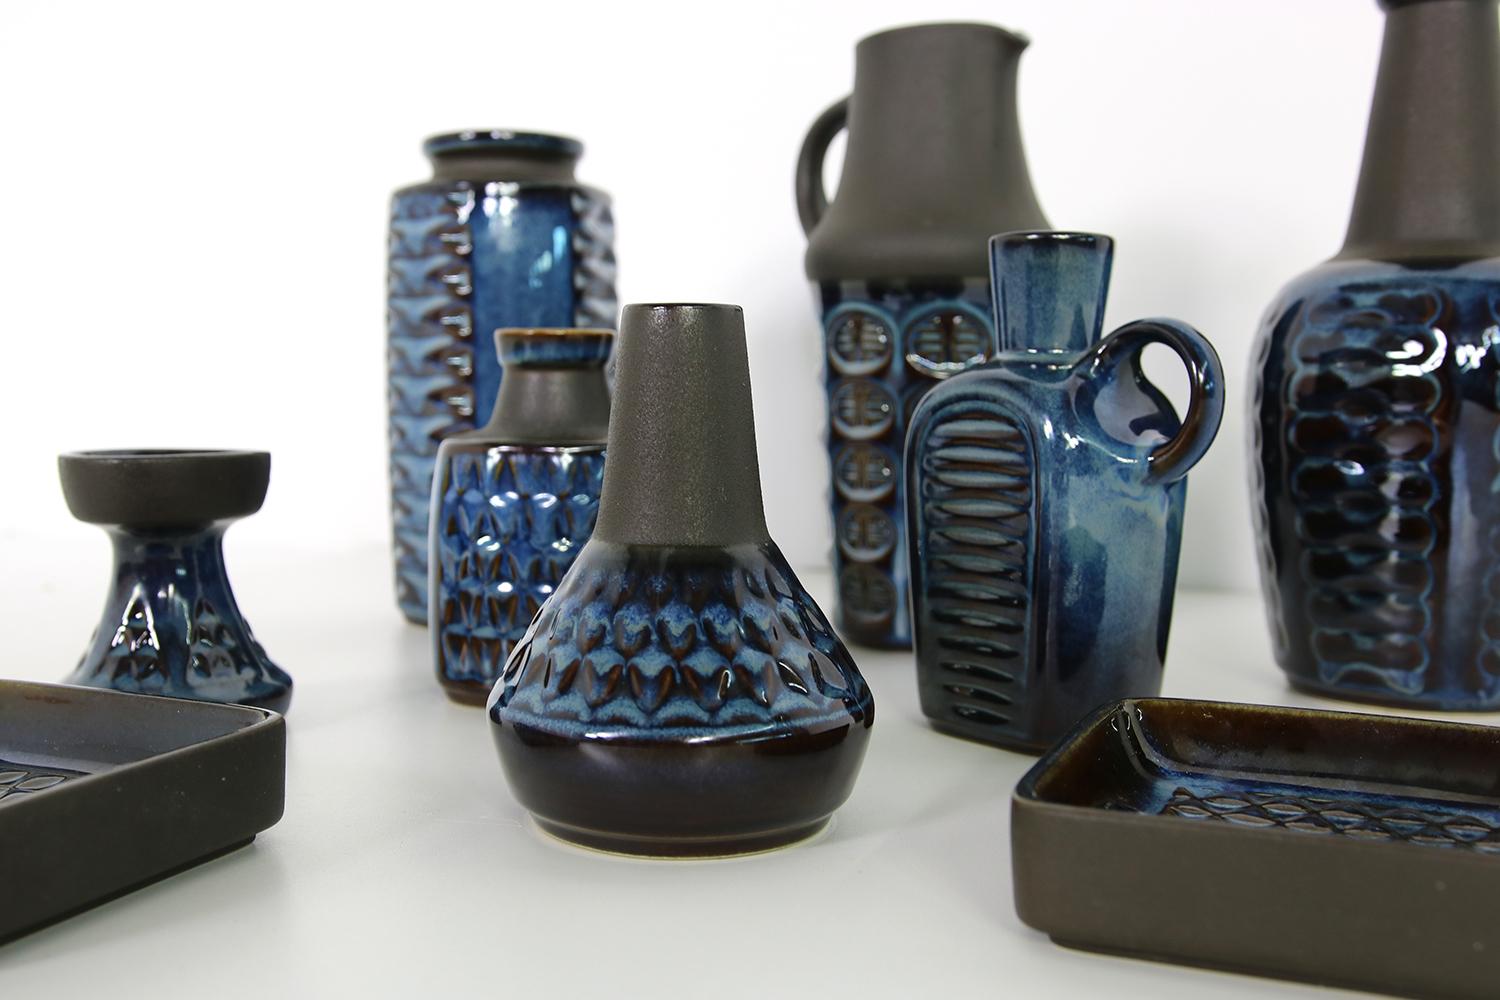 Beautiful set of nine (9) pieces, vases and bowls, collector's condition, beautiful, blue glaze mixed with matt black, beautiful pottery art.
Six vases, one candle stick holder, two bowls. 
The vases are 26, 25, 22, 16, 2x 13, 9cm high, the bowls